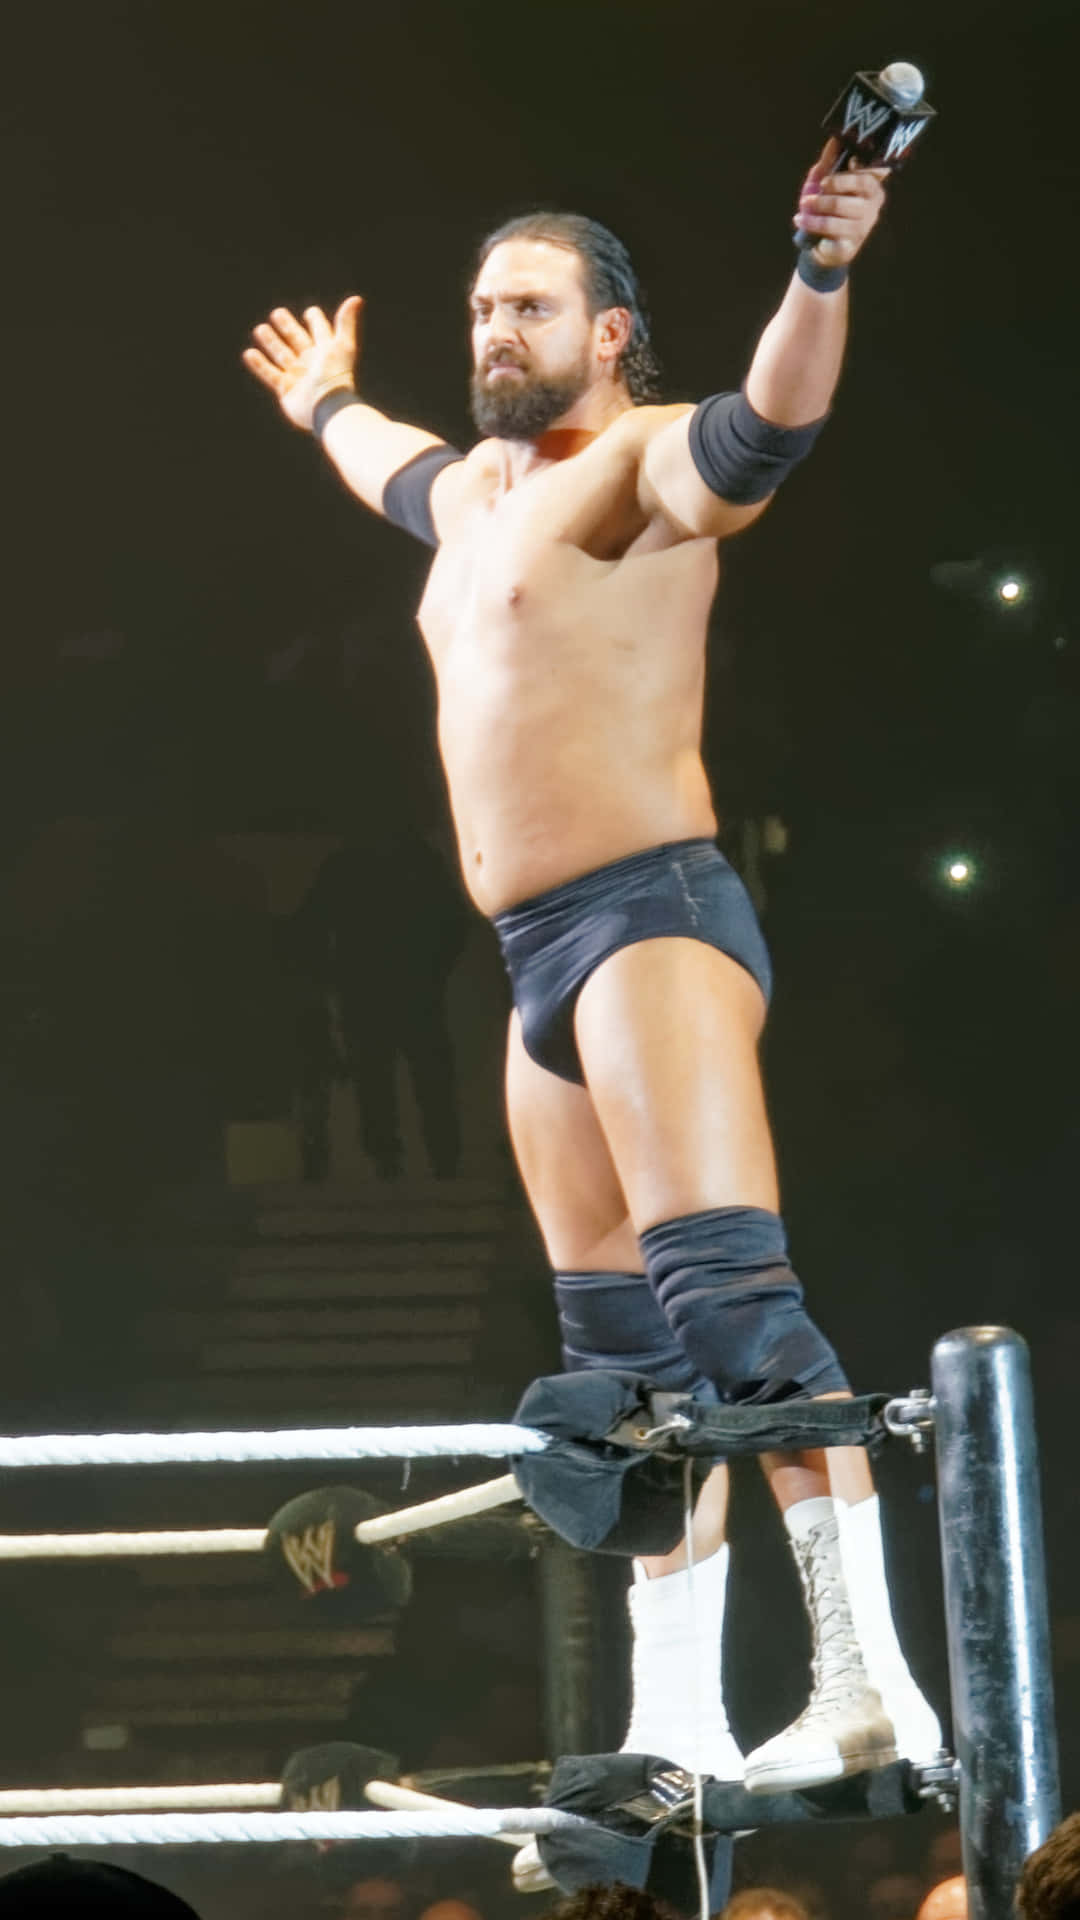 Damien Sandow Showcasing His Charismatic Personality In The Wrestling Ring. Wallpaper